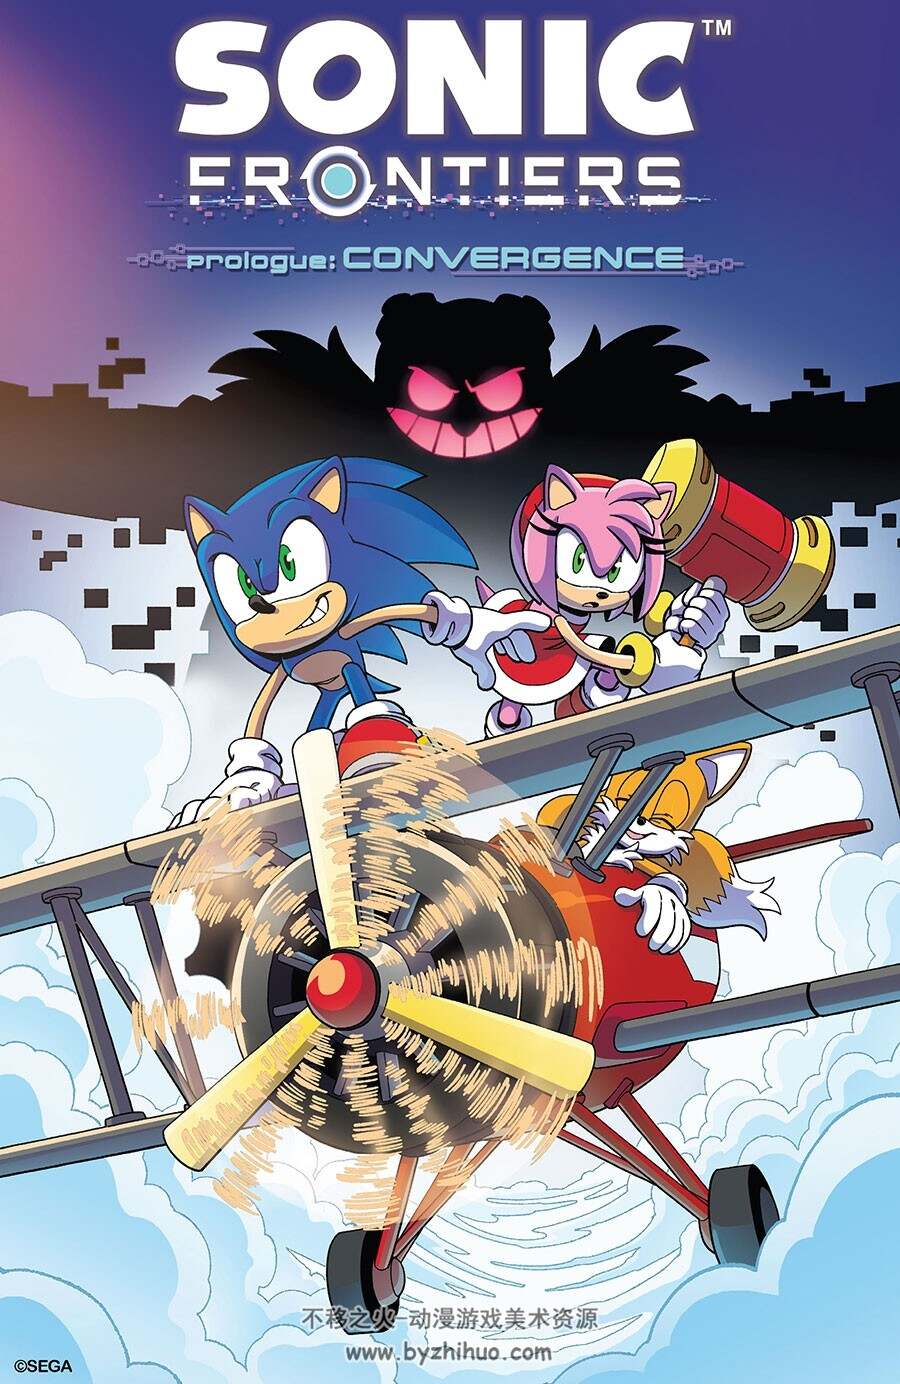 Sonic Frontiers Prologue Convergence 漫画 百度网盘下载